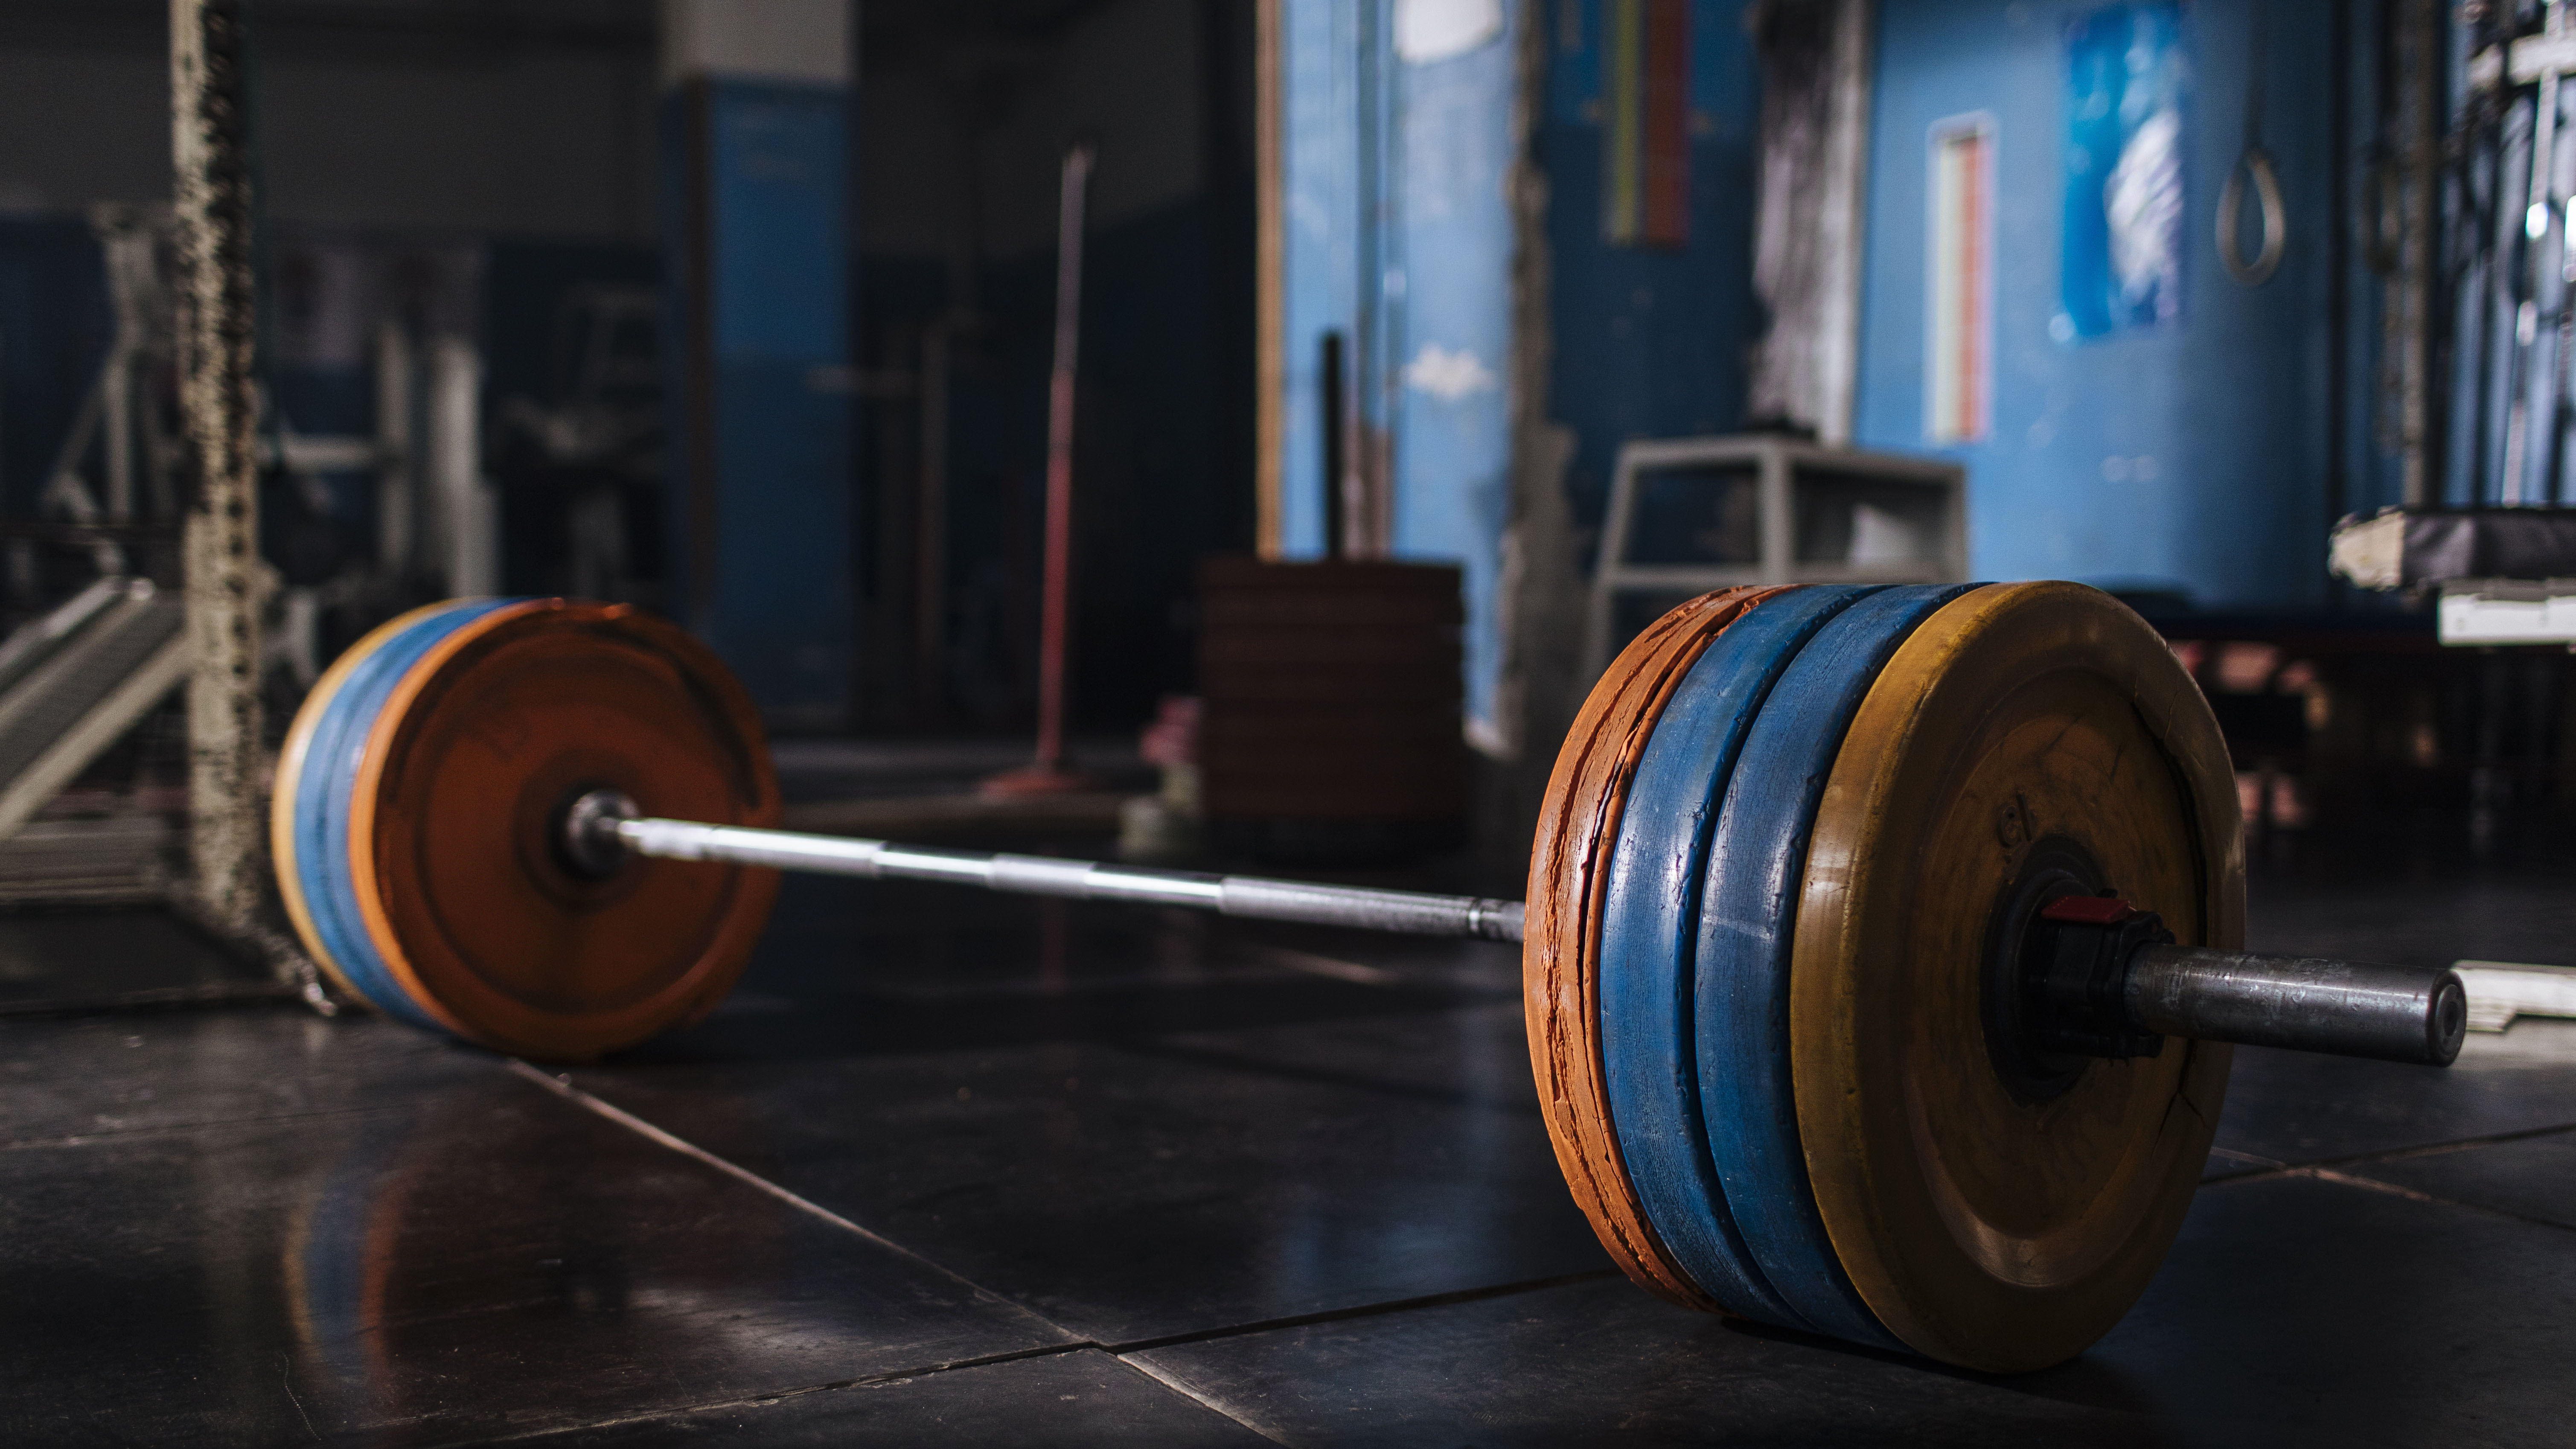 Barbell on the floor of an empty gym